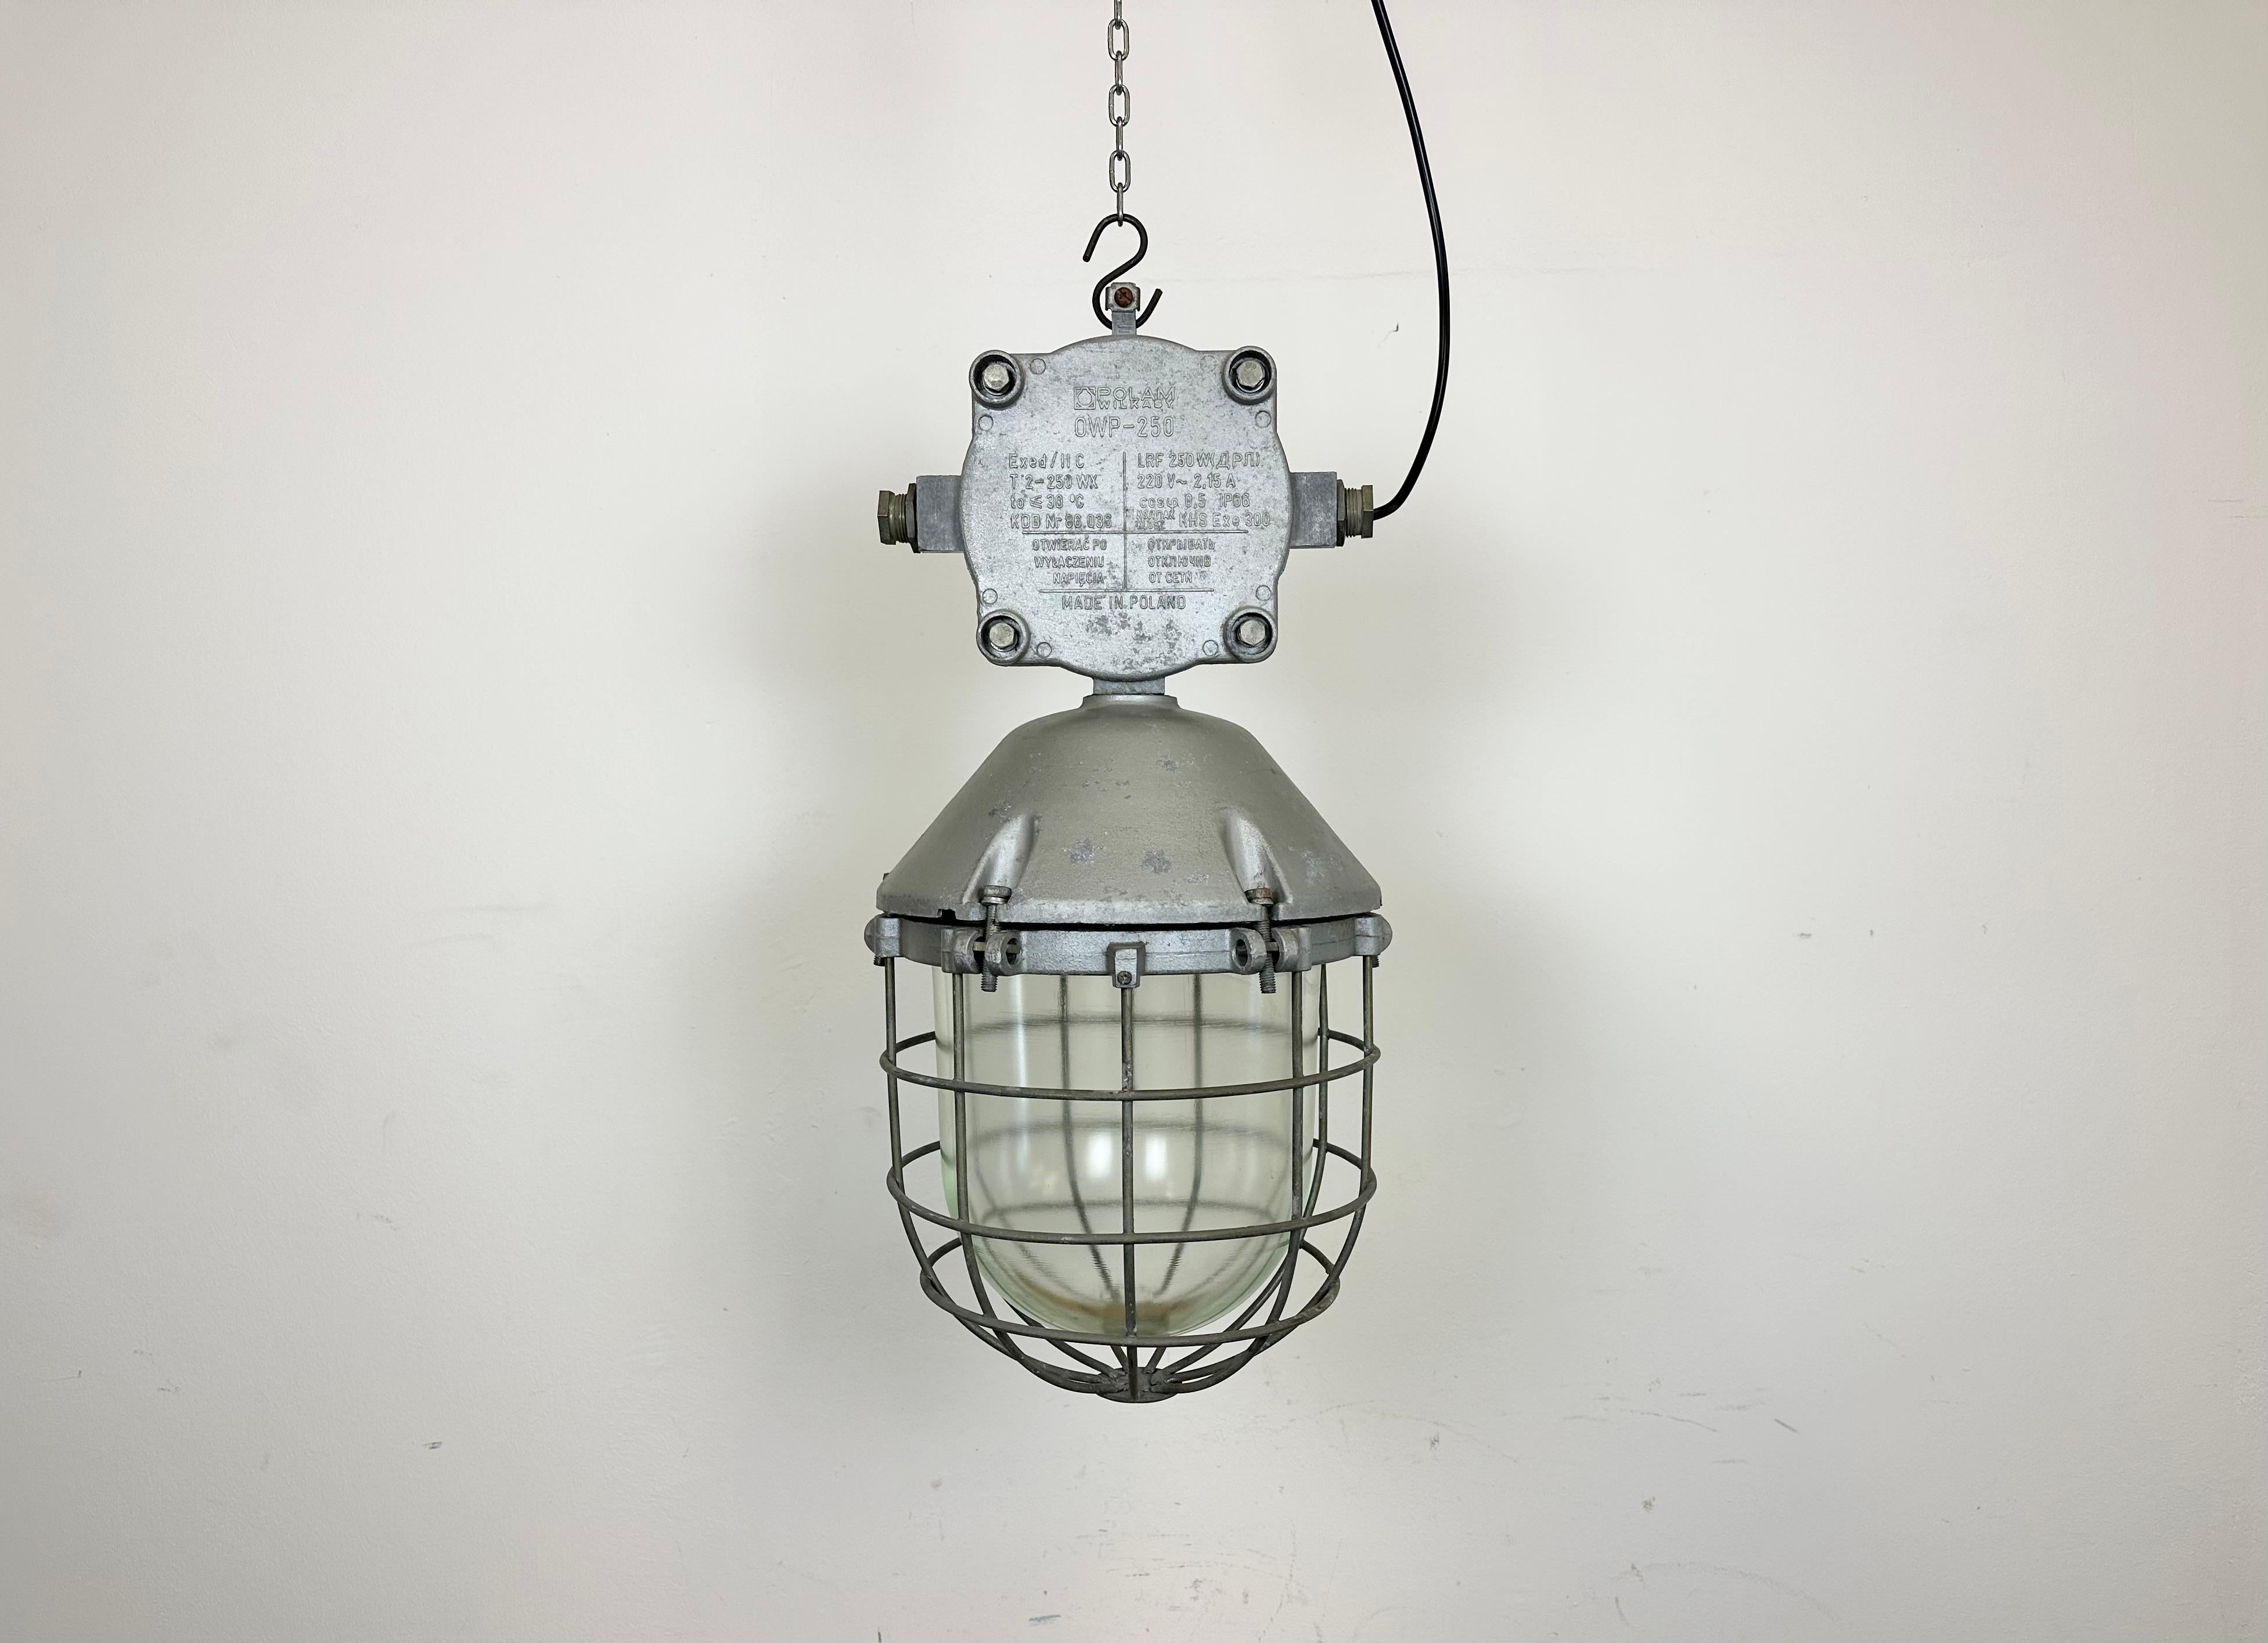 Large industrial factory hanging lamp made by Polam Wilkasy in Poland during the 1970s. It features a cast aluminium body, a clear glass cover and iron grid. The porcelain socket requires E 27/ E26 lightbulbs. New wire. The weight of the lamp is 9